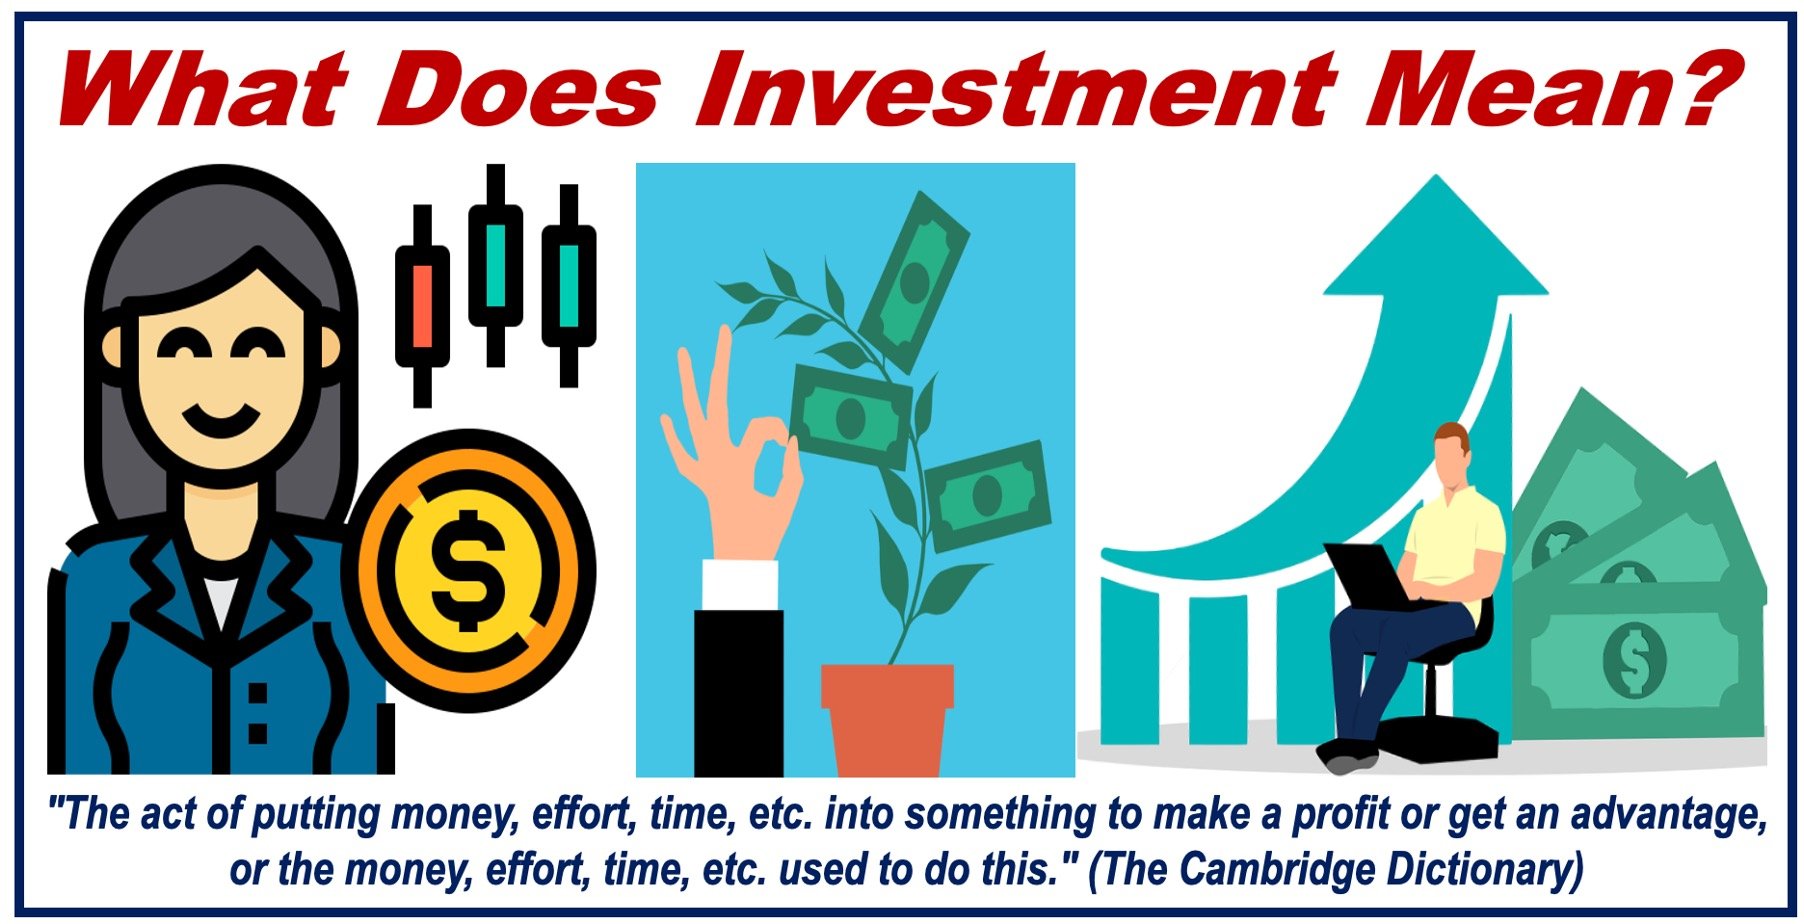 Three images related to investment plus a definition of investment.